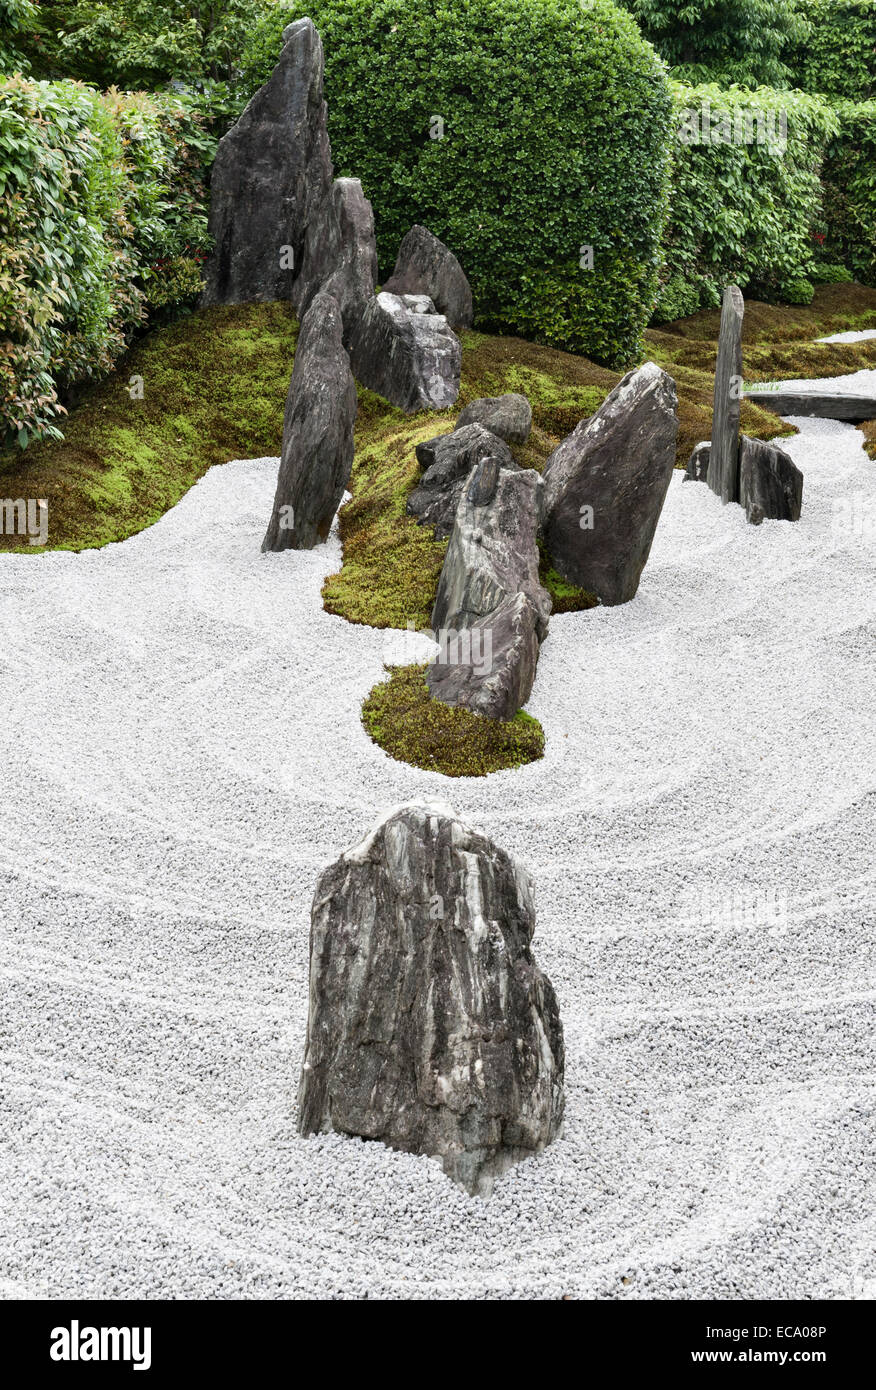 Zuiho-in zen temple, Daitoku-ji, Kyoto, Japan. Carefully situated rocks and raked gravel in the South Garden Stock Photo